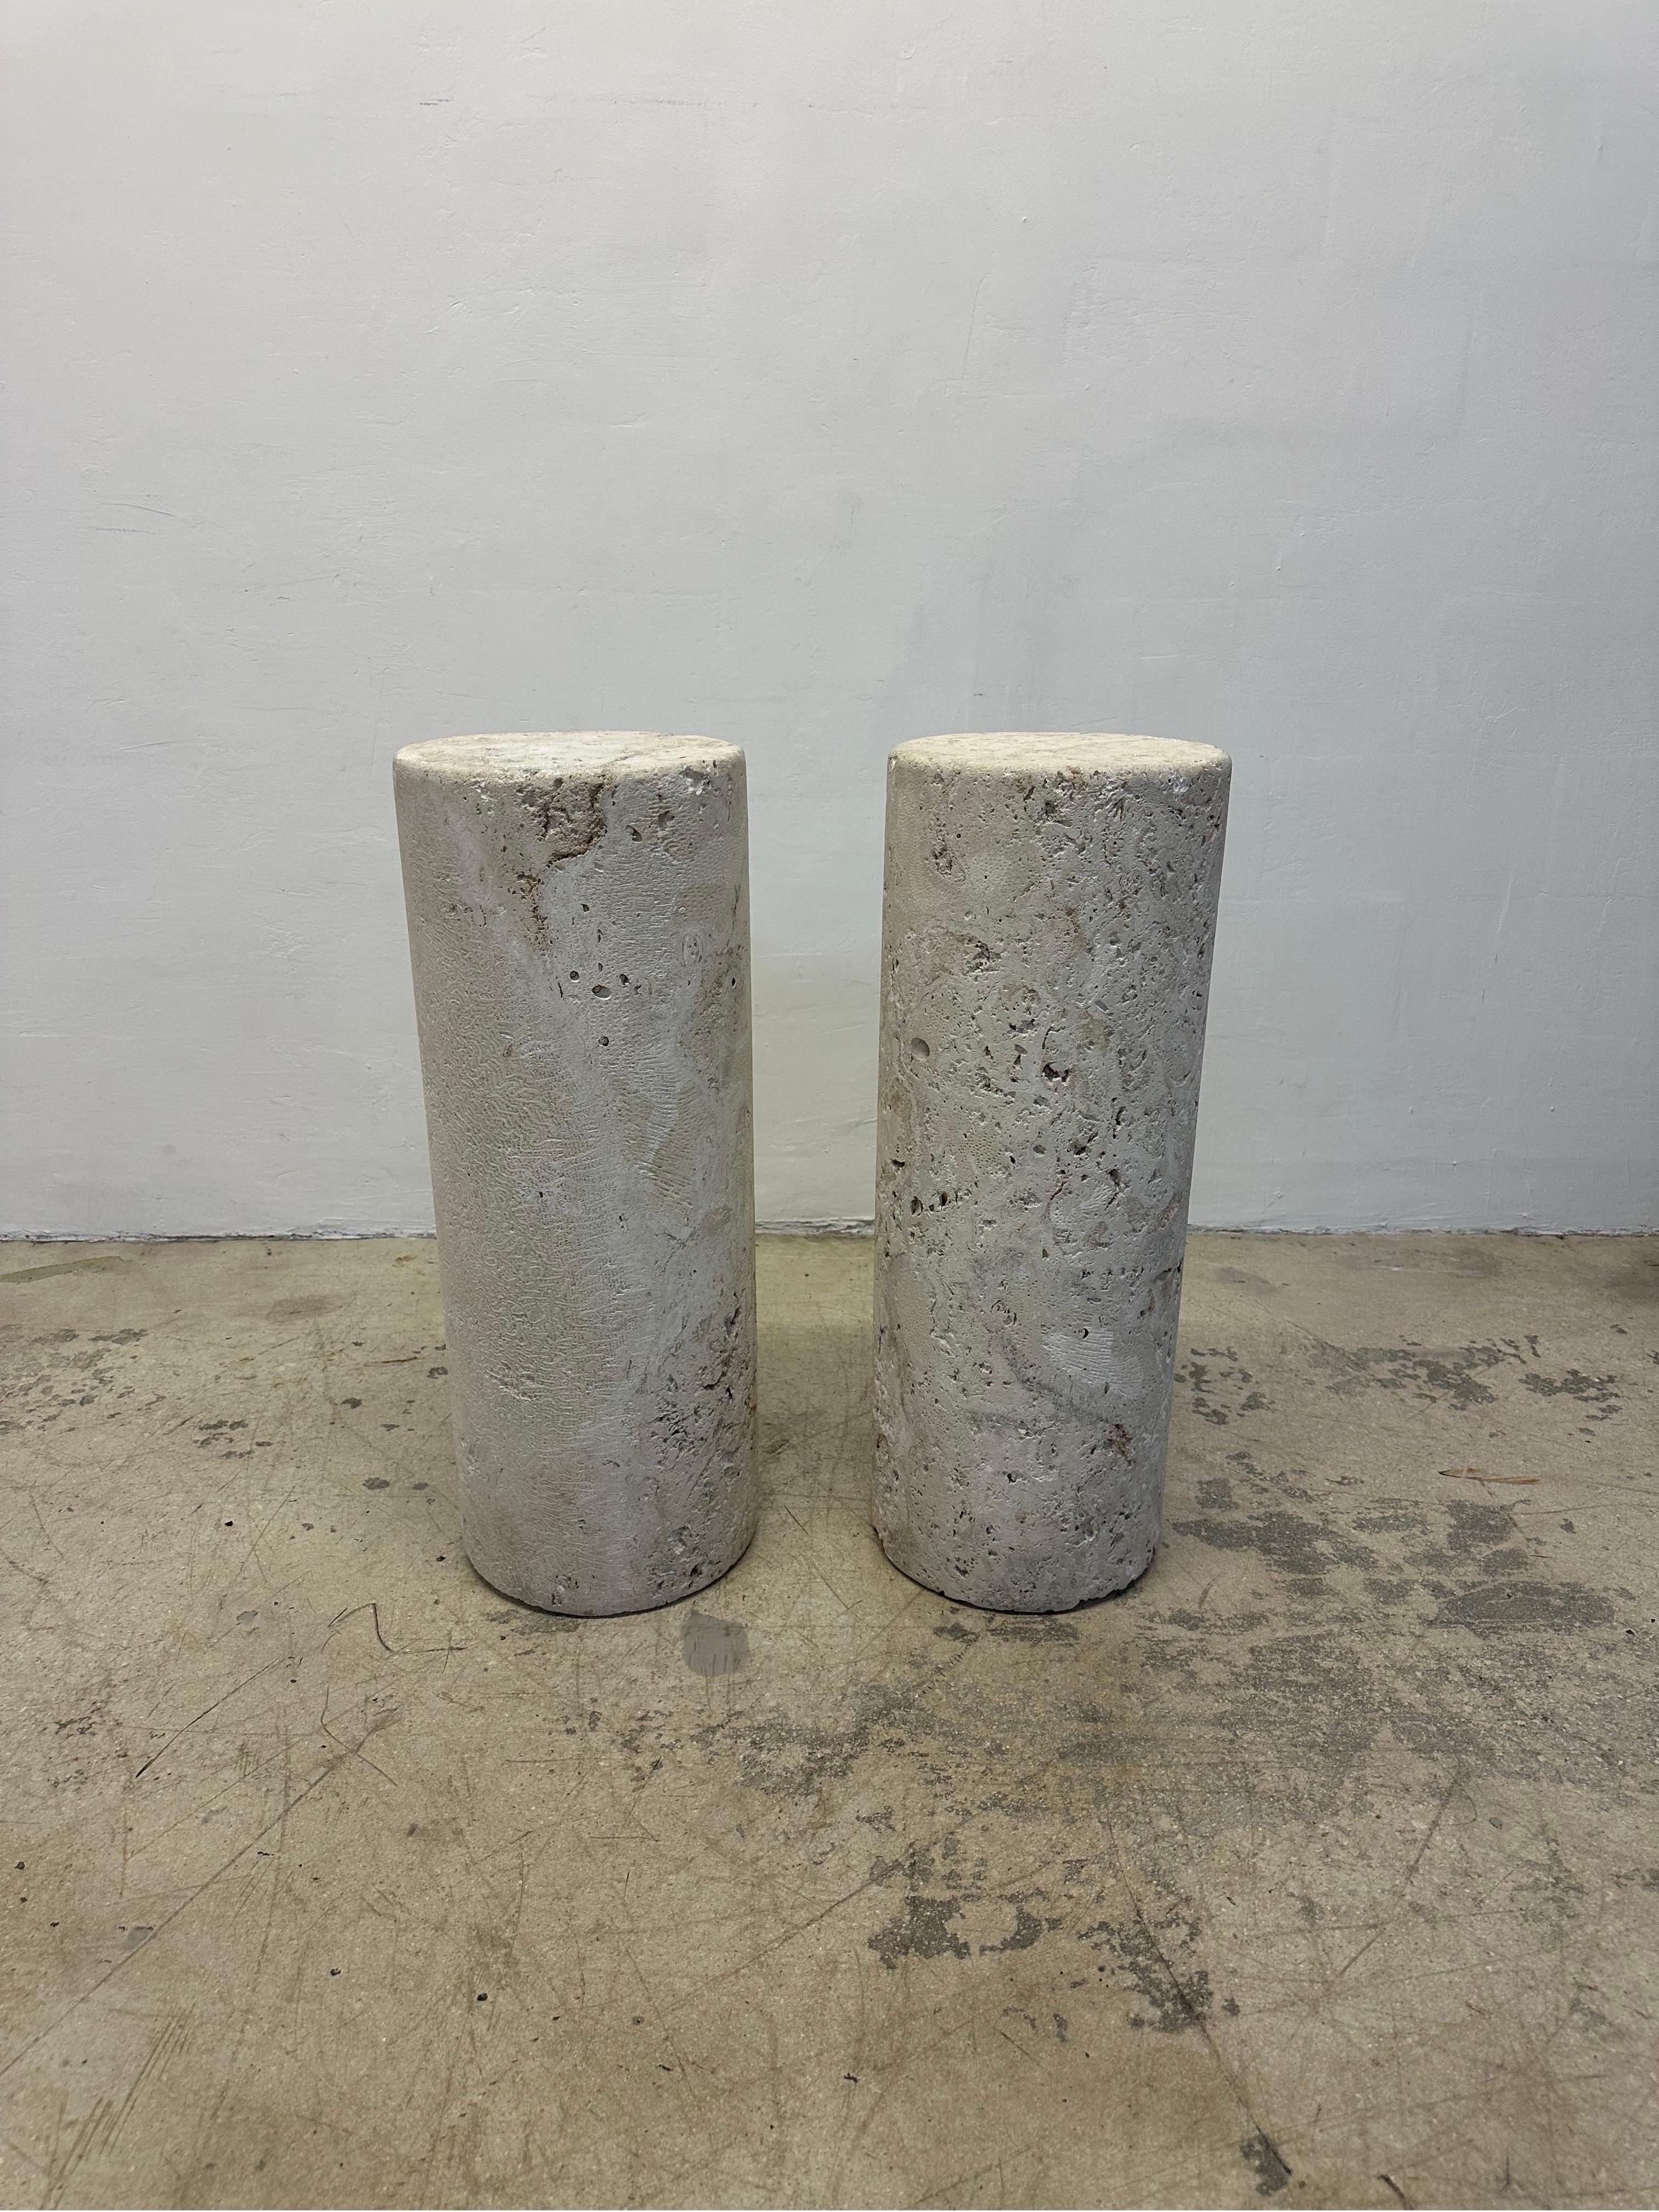 Pair of mid-century natural coquina coral stone pedestal column tables.

Also available as a console with glass top. Please see separate listing here:

1stDibs Ref: LU5392238957192